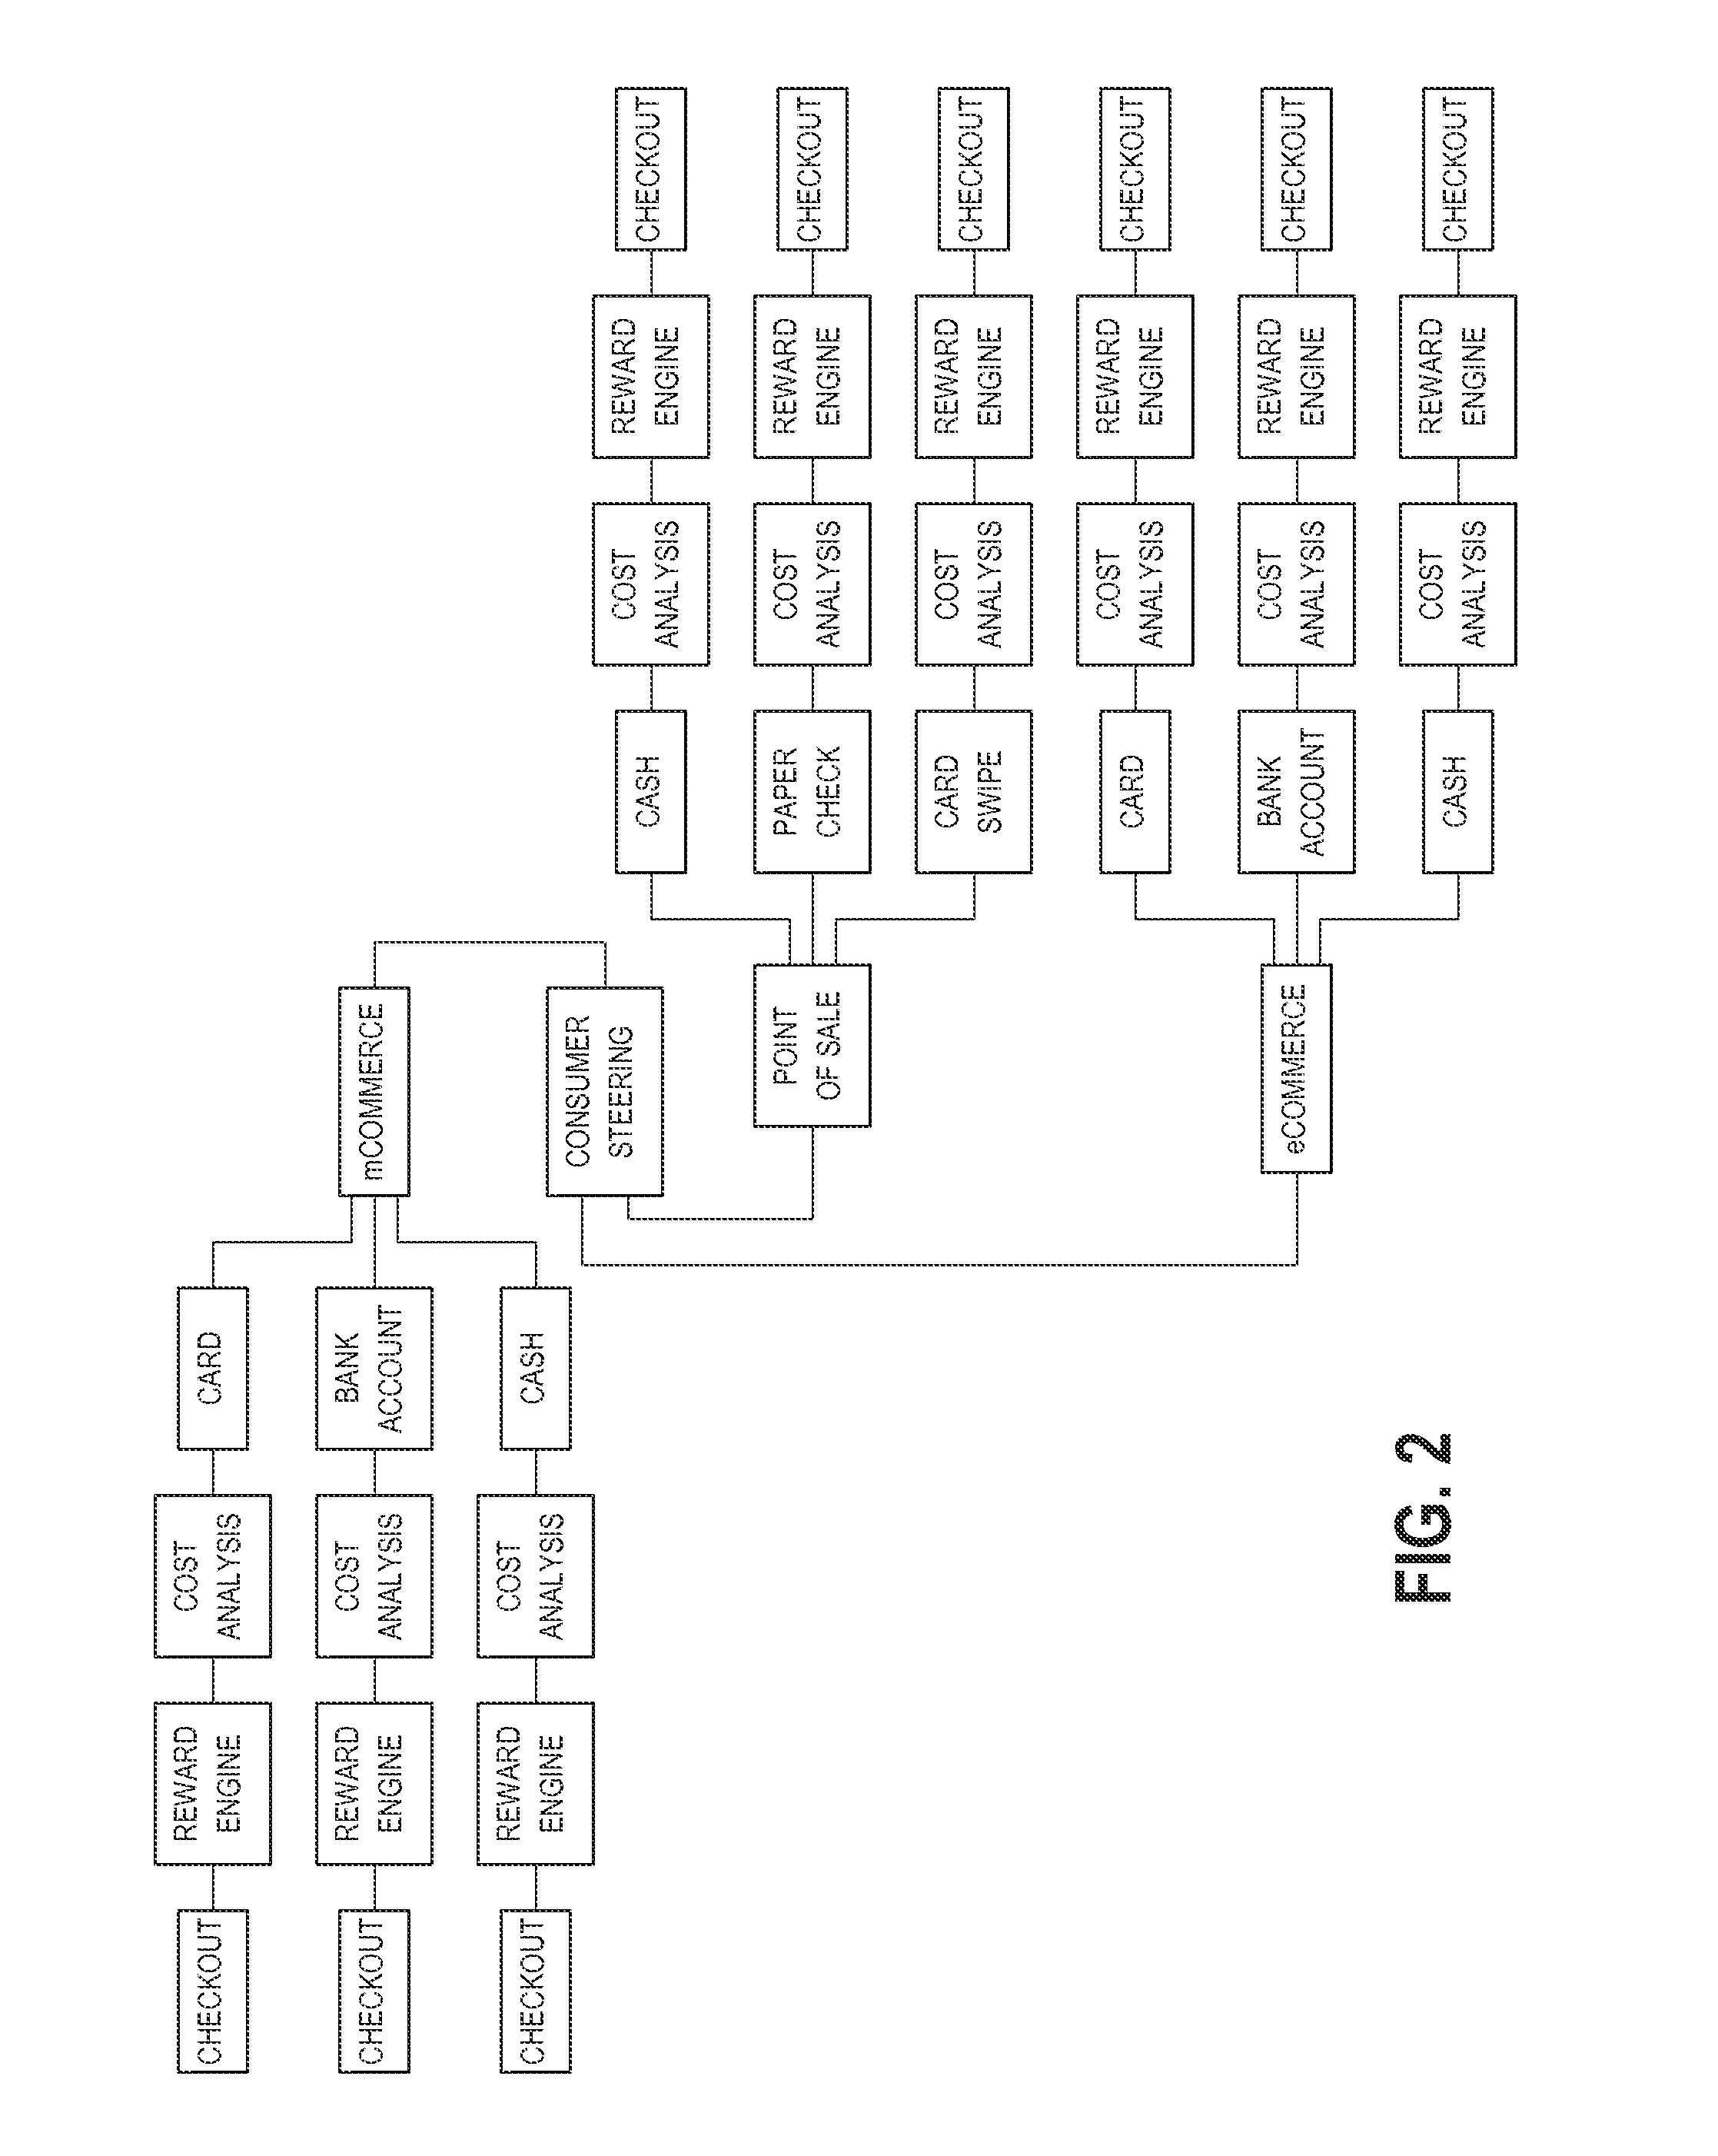 Systems and methods for consumer steering based on real-time transaction cost information